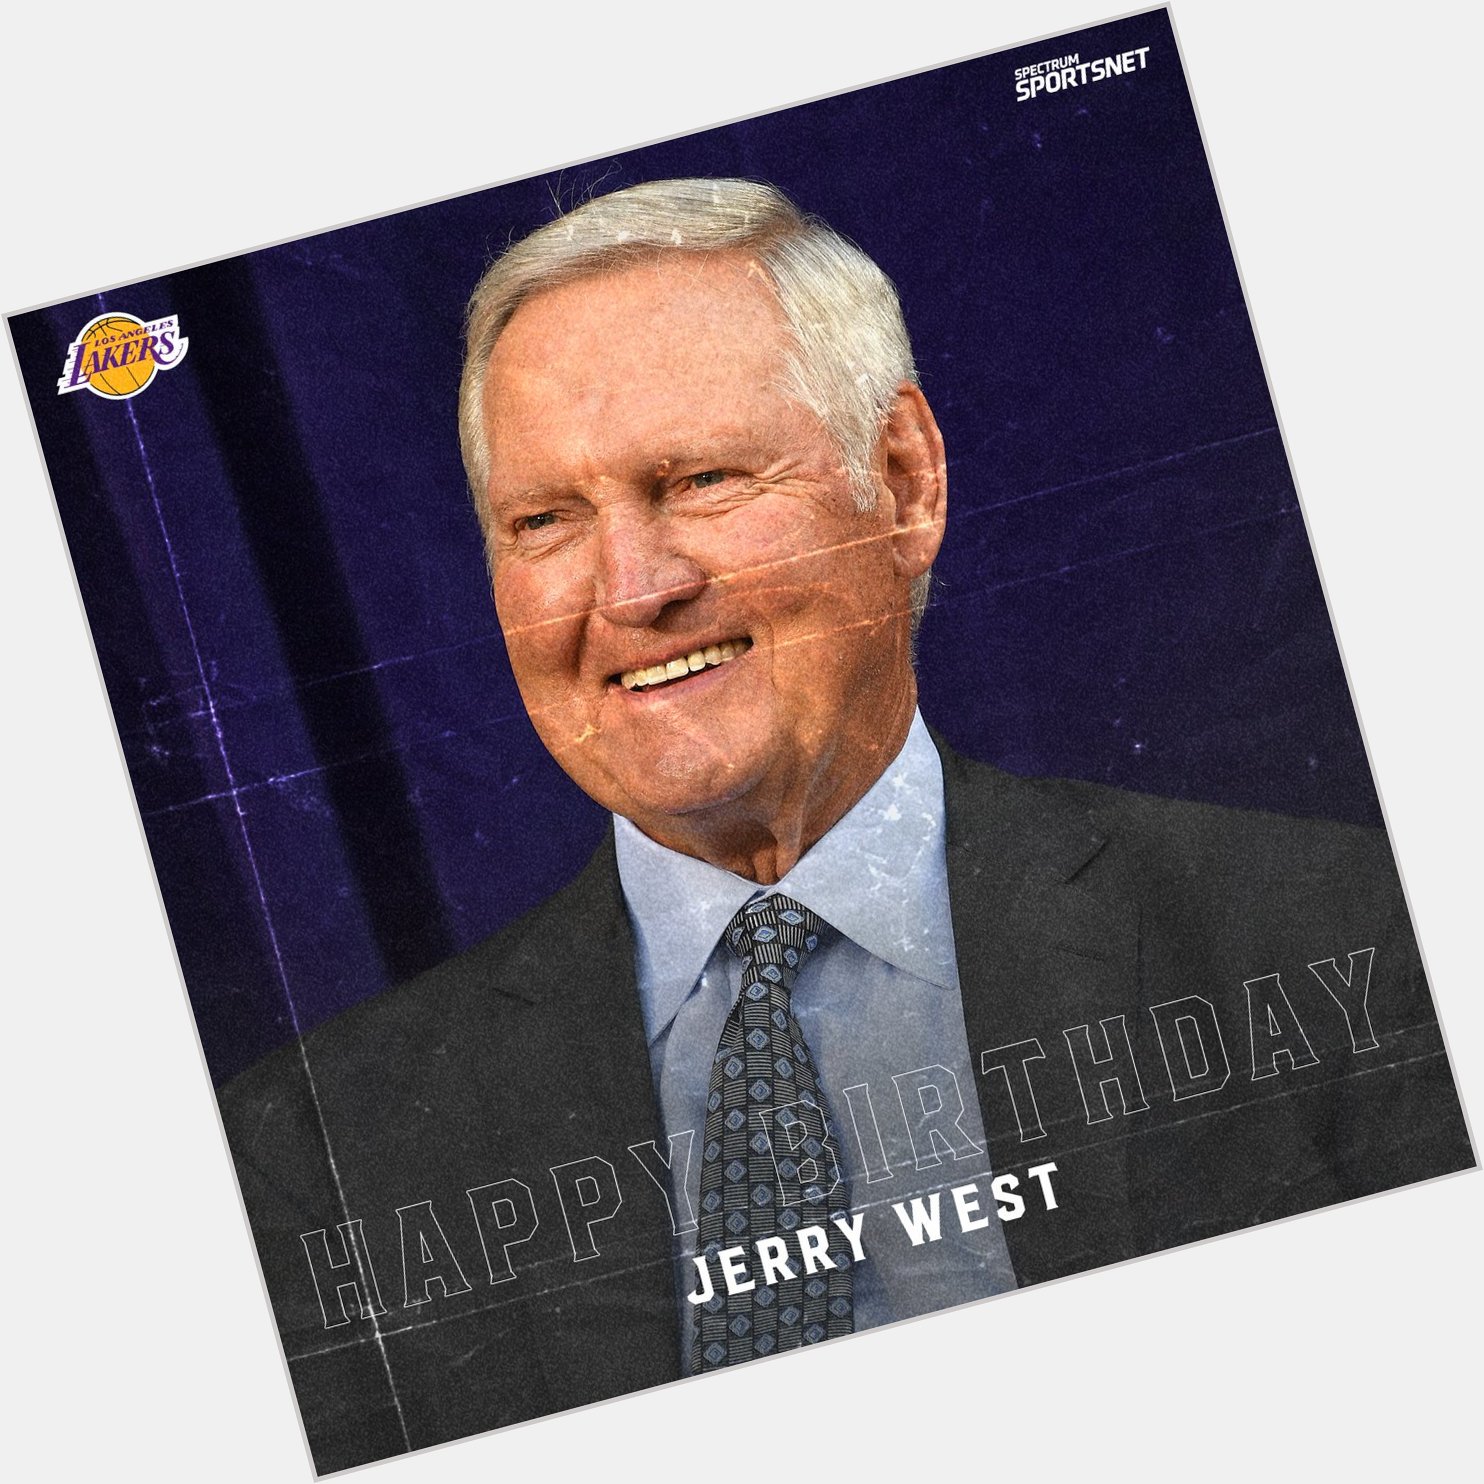 Happy birthday to the great Jerry West! 